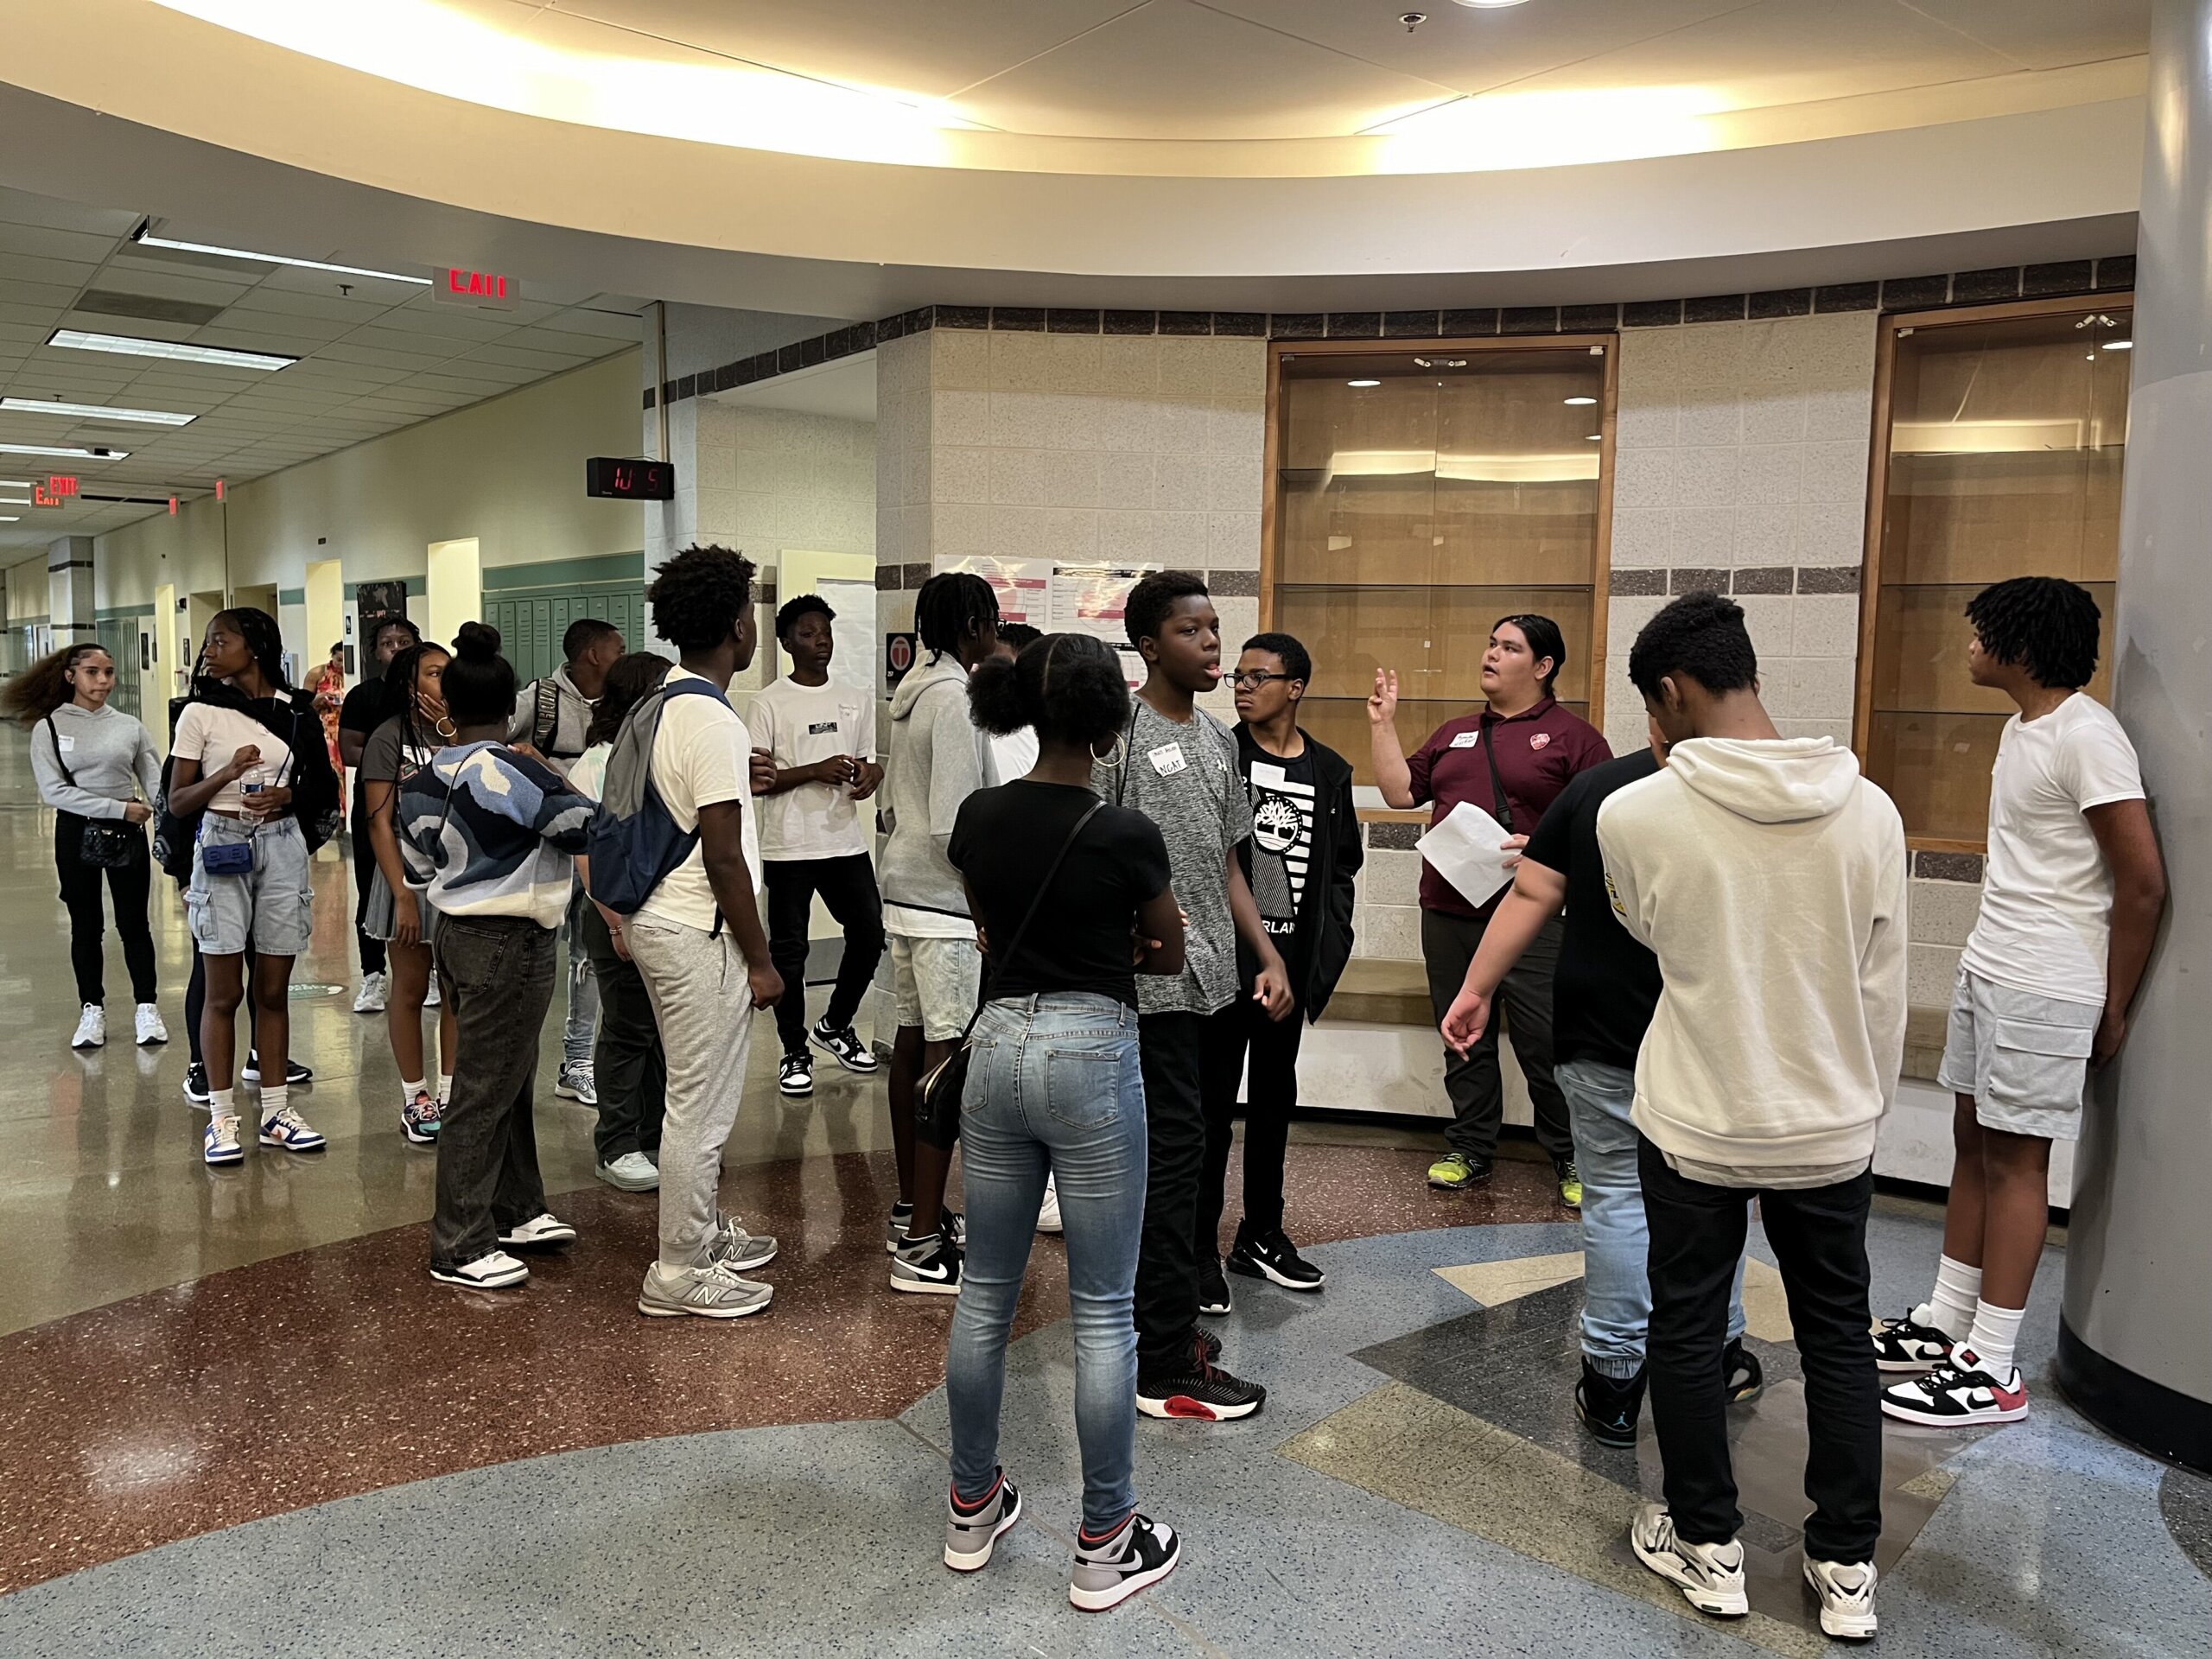 DC students get lay of the land before new year starts – WTOP News